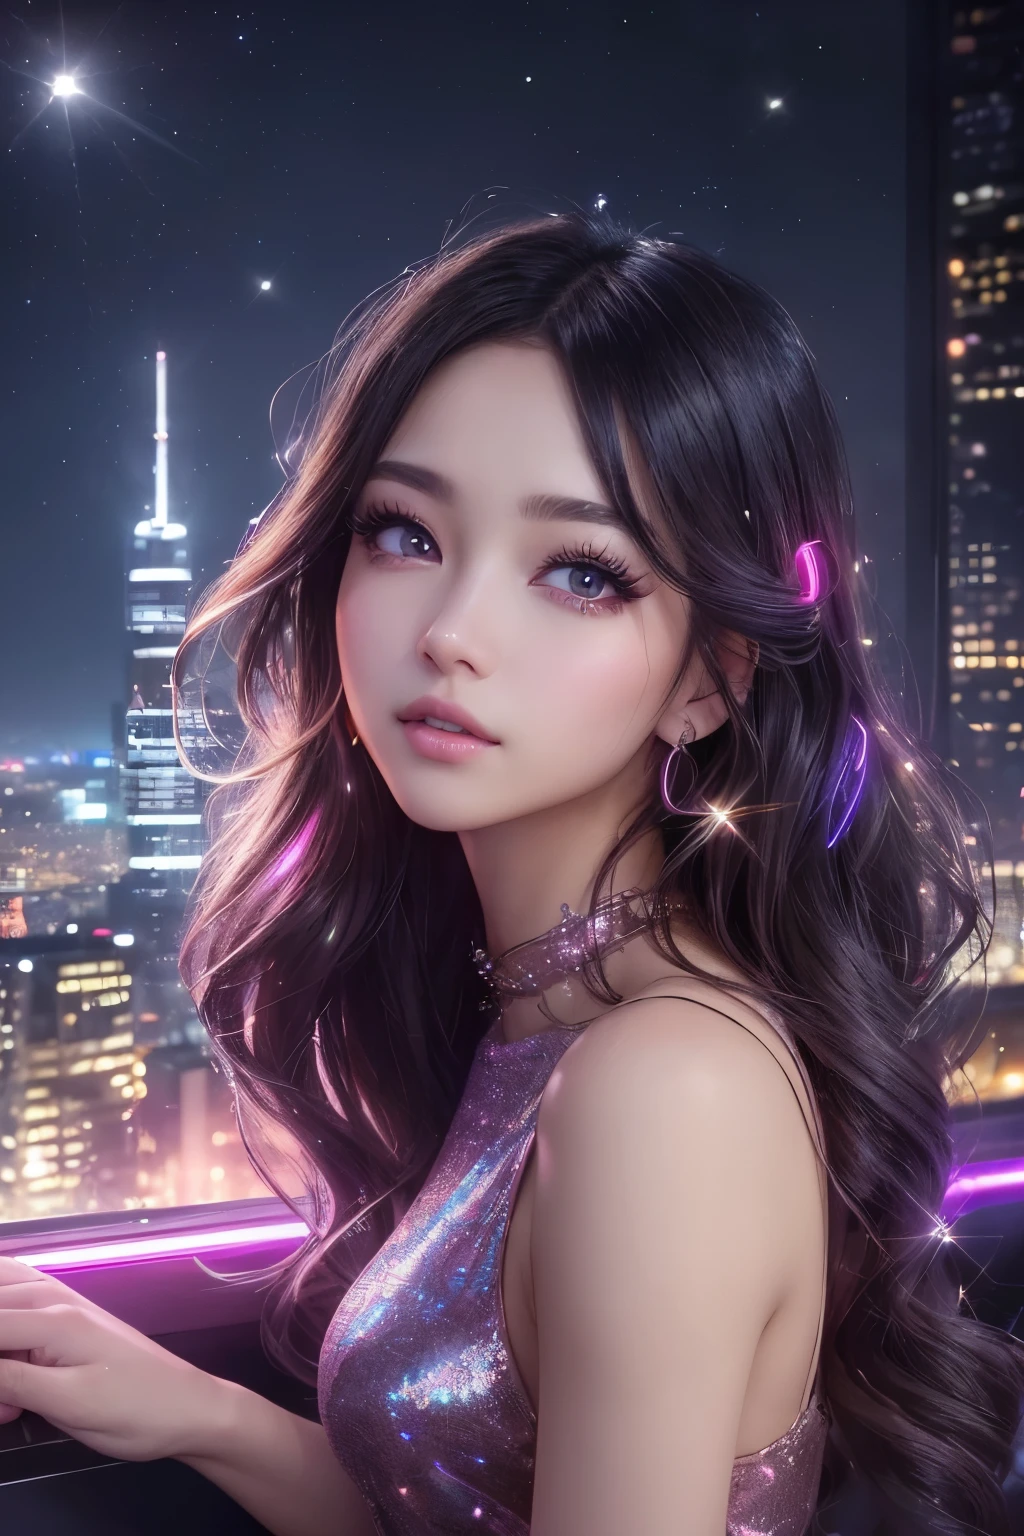 prominent eyelashes、Beautiful eyes、Beautiful lips:1.3、((calm atmosphere、urban style dressing:1.2))、soft and natural light、darker shadows:0.9、Vibrant colors、Beautiful skin tone、((A space sparkling with neon lights:1.1))、Glittering night view、((Urban background、highrise buildings:1.2))。